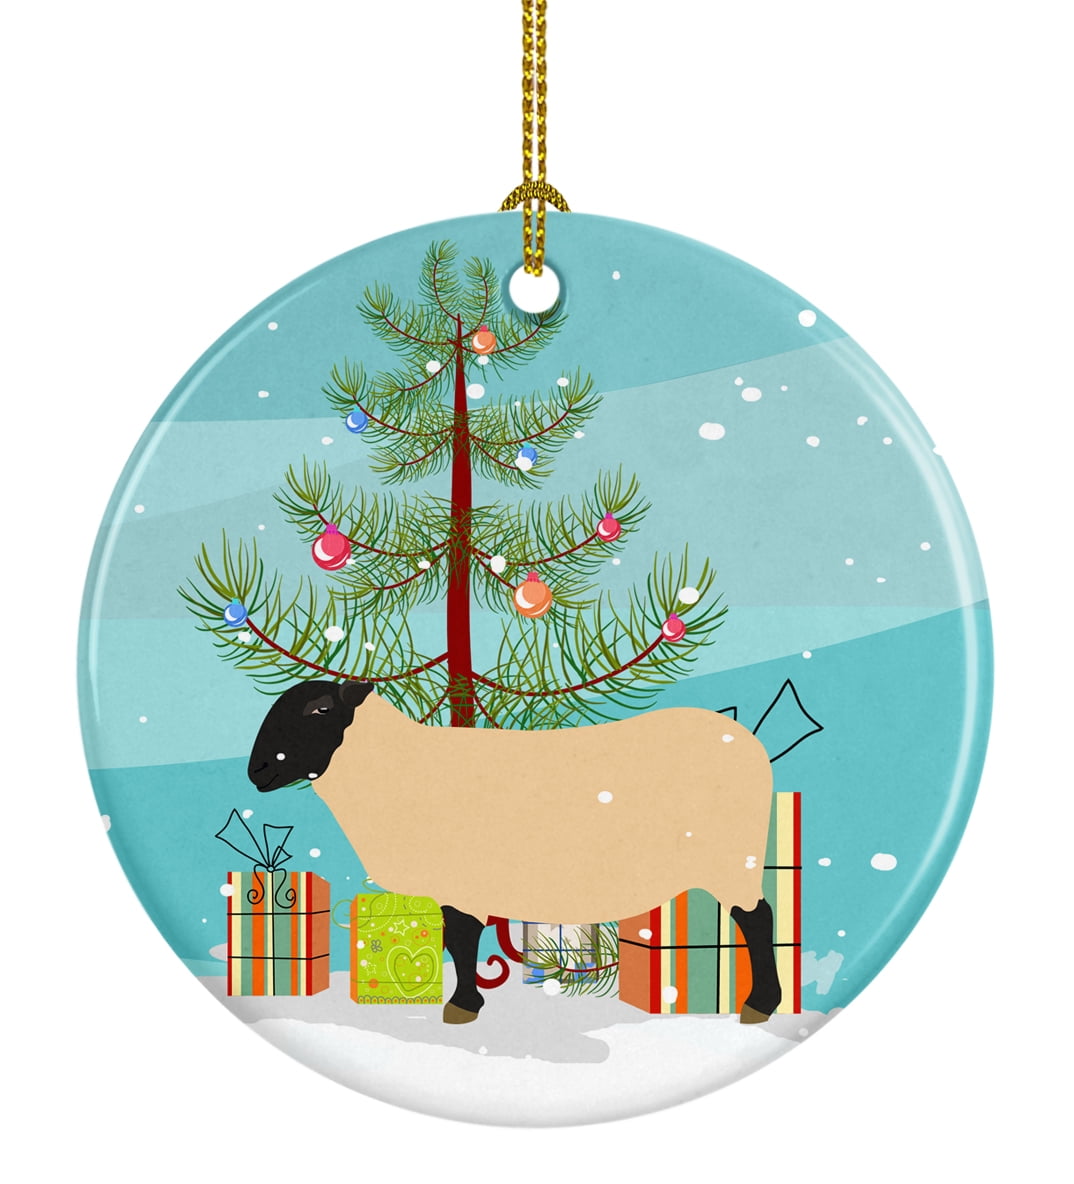  Donkey Kicking Solid Unfinished Craft Wood Holiday Christmas  Tree DIY Pre-Drilled Ornament